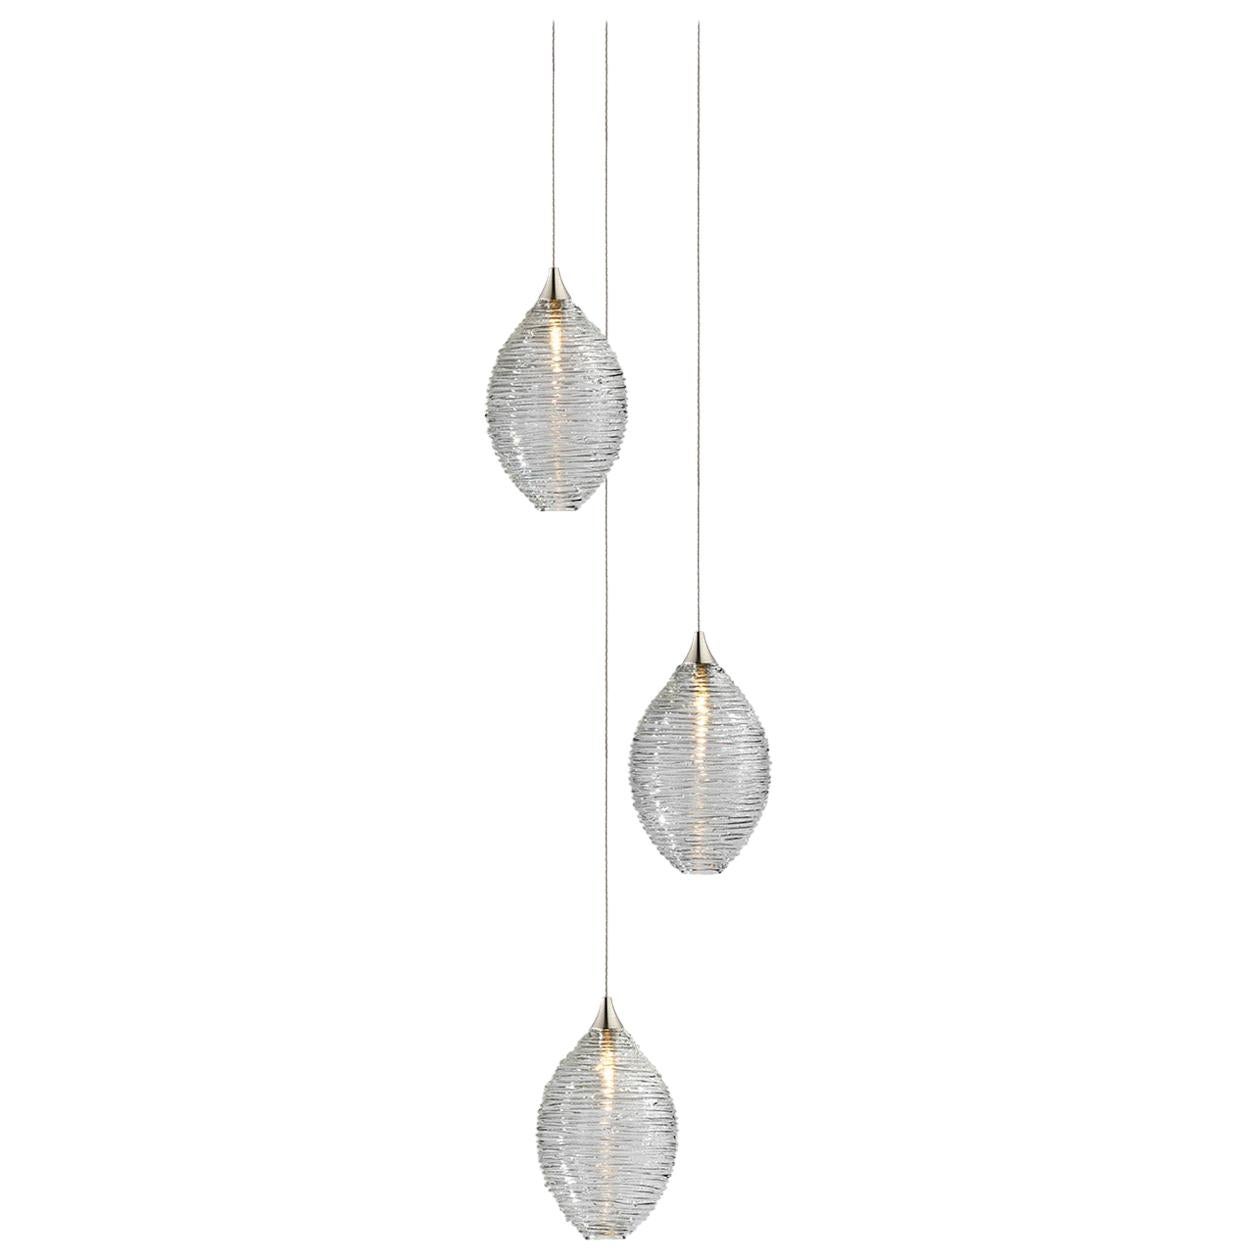 Cocoon 3, 6" Dia x 9" H Blown Glass Pendant Bedside Chandelier by Shakuff For Sale